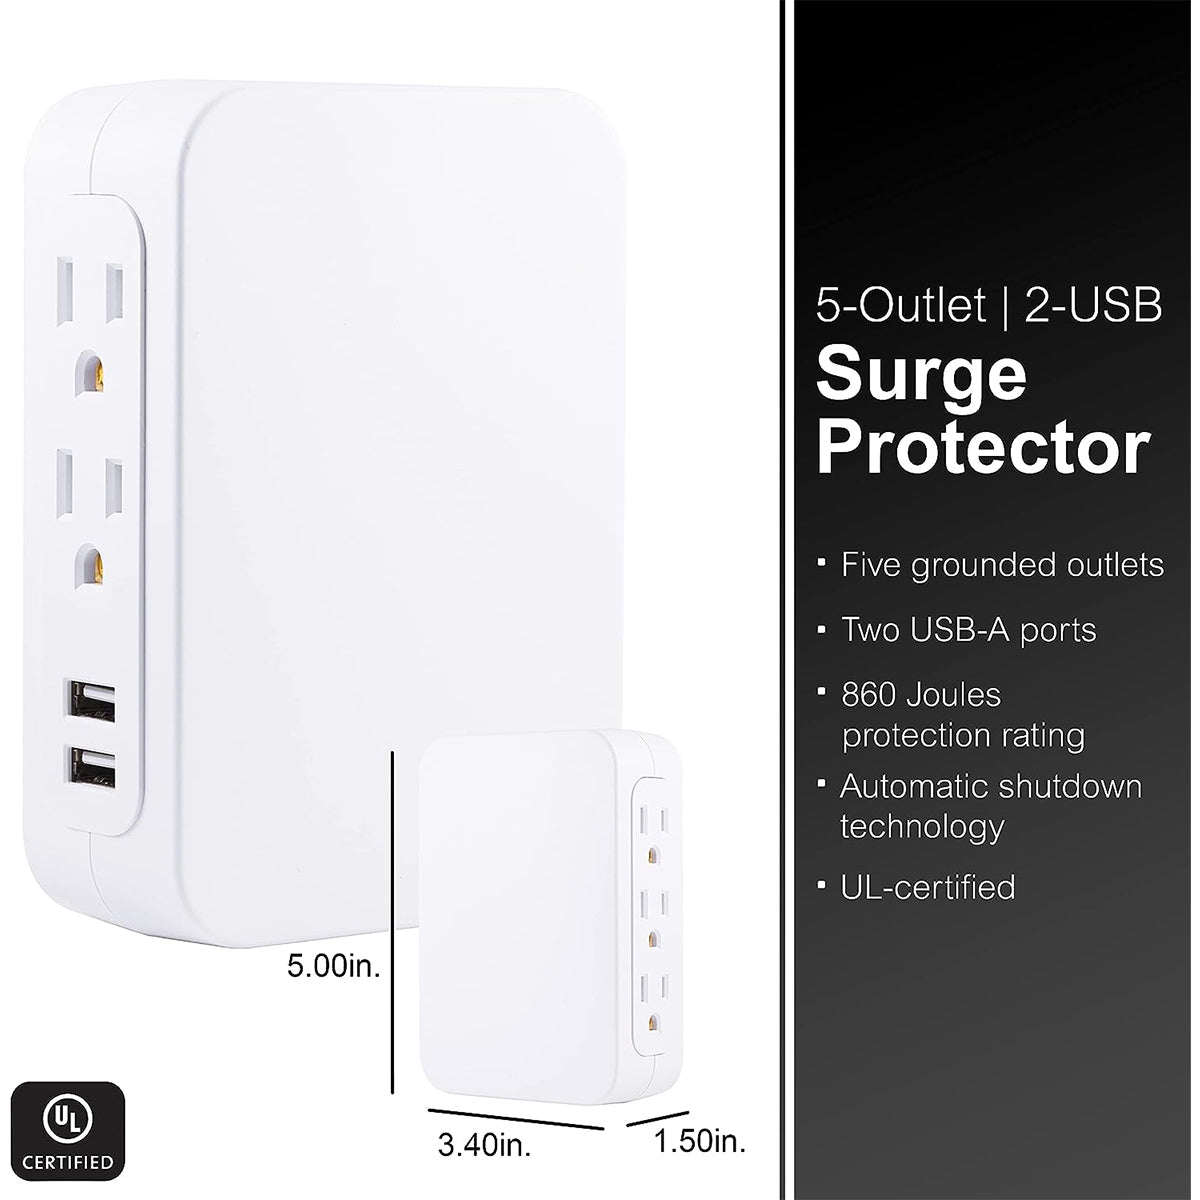 GE Pro USB Charging Surge Protector, 5 Outlets 2 USB Ports – Side Access